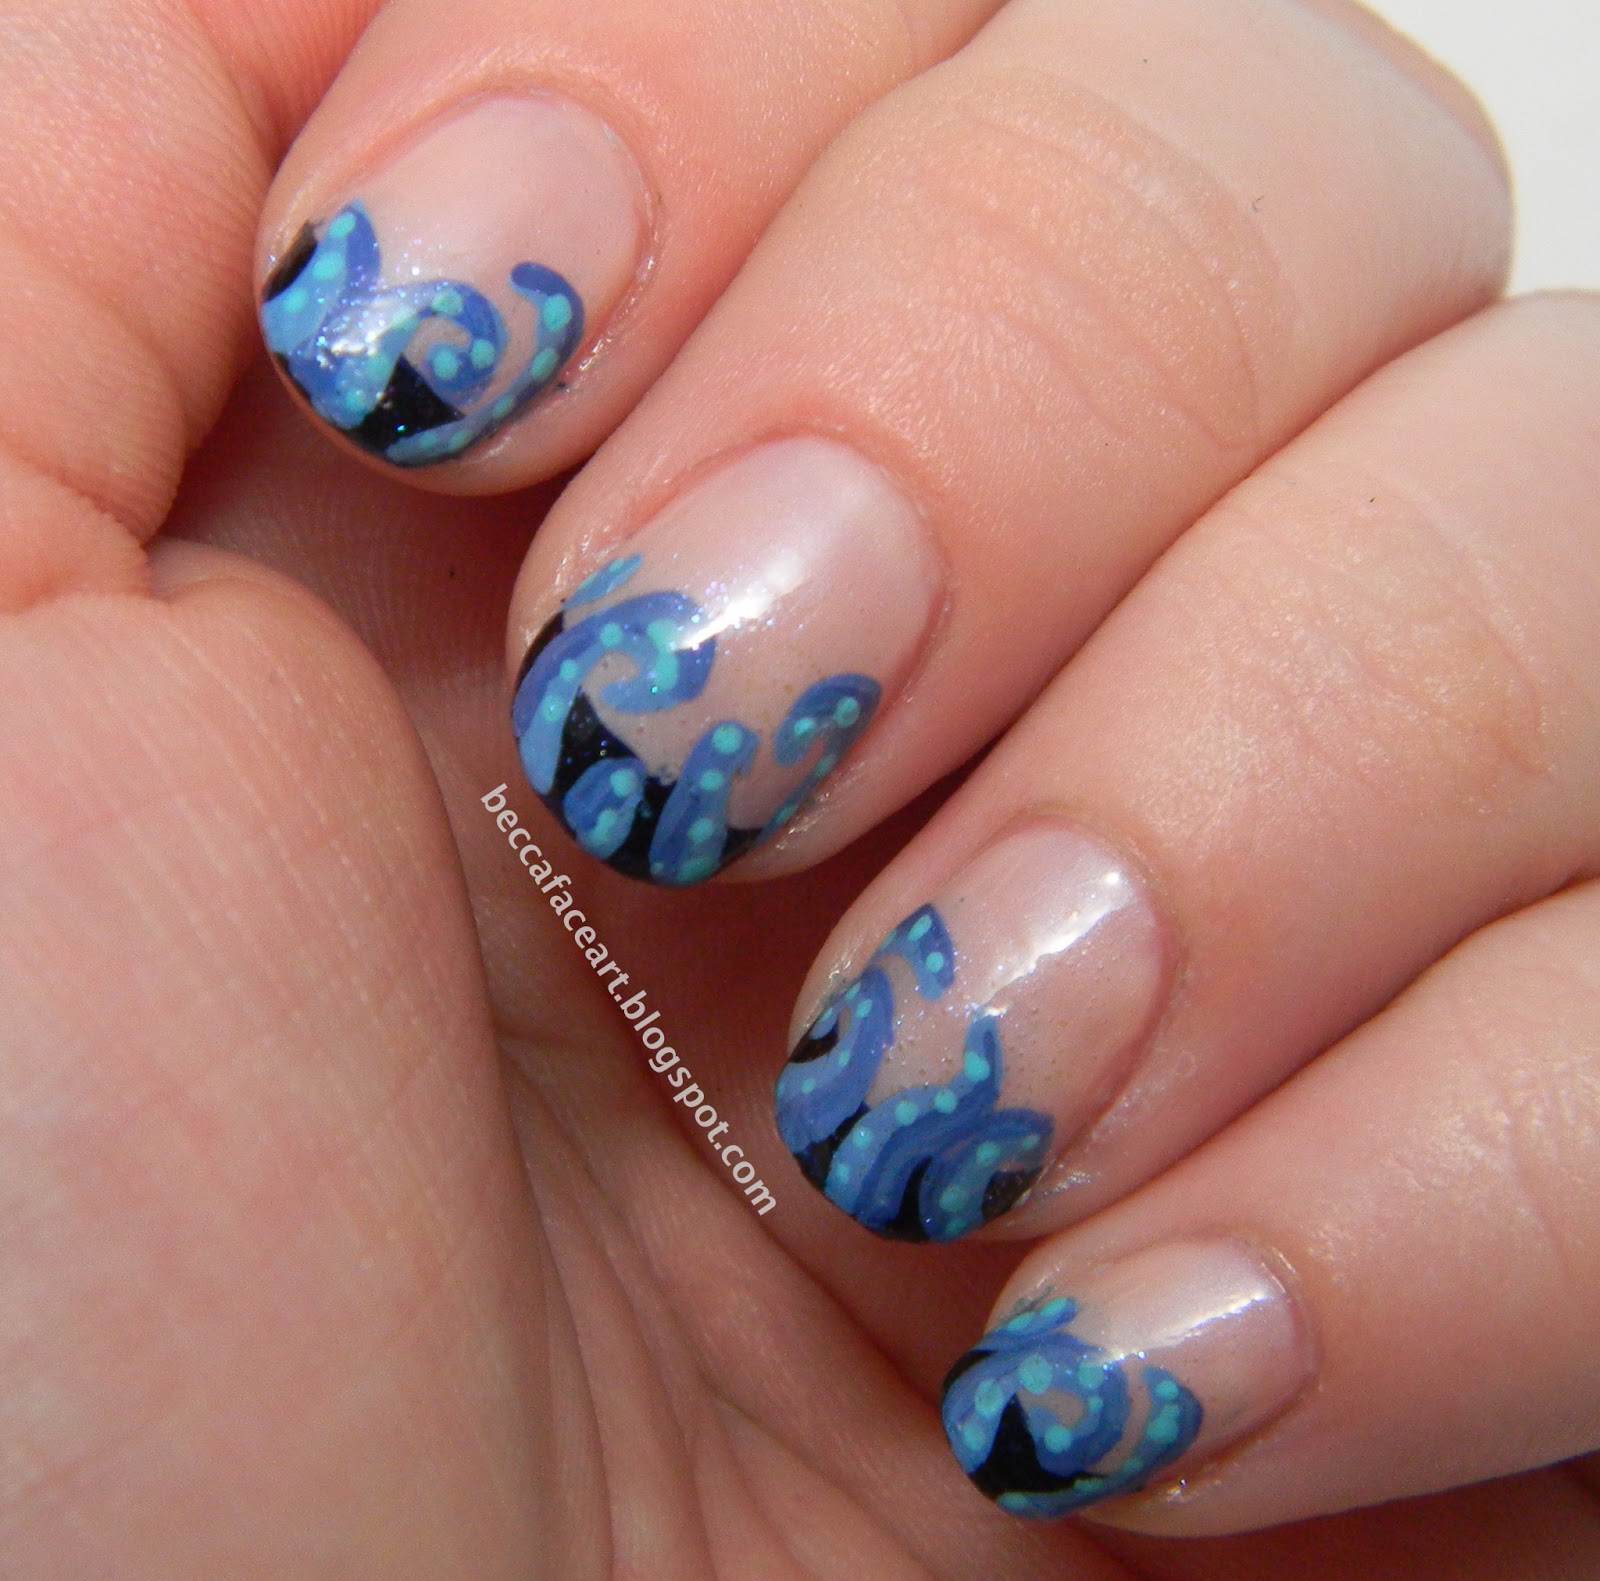 Becca Face Nail Art: Tentacle French Tip Design... Inspired by Robin ...